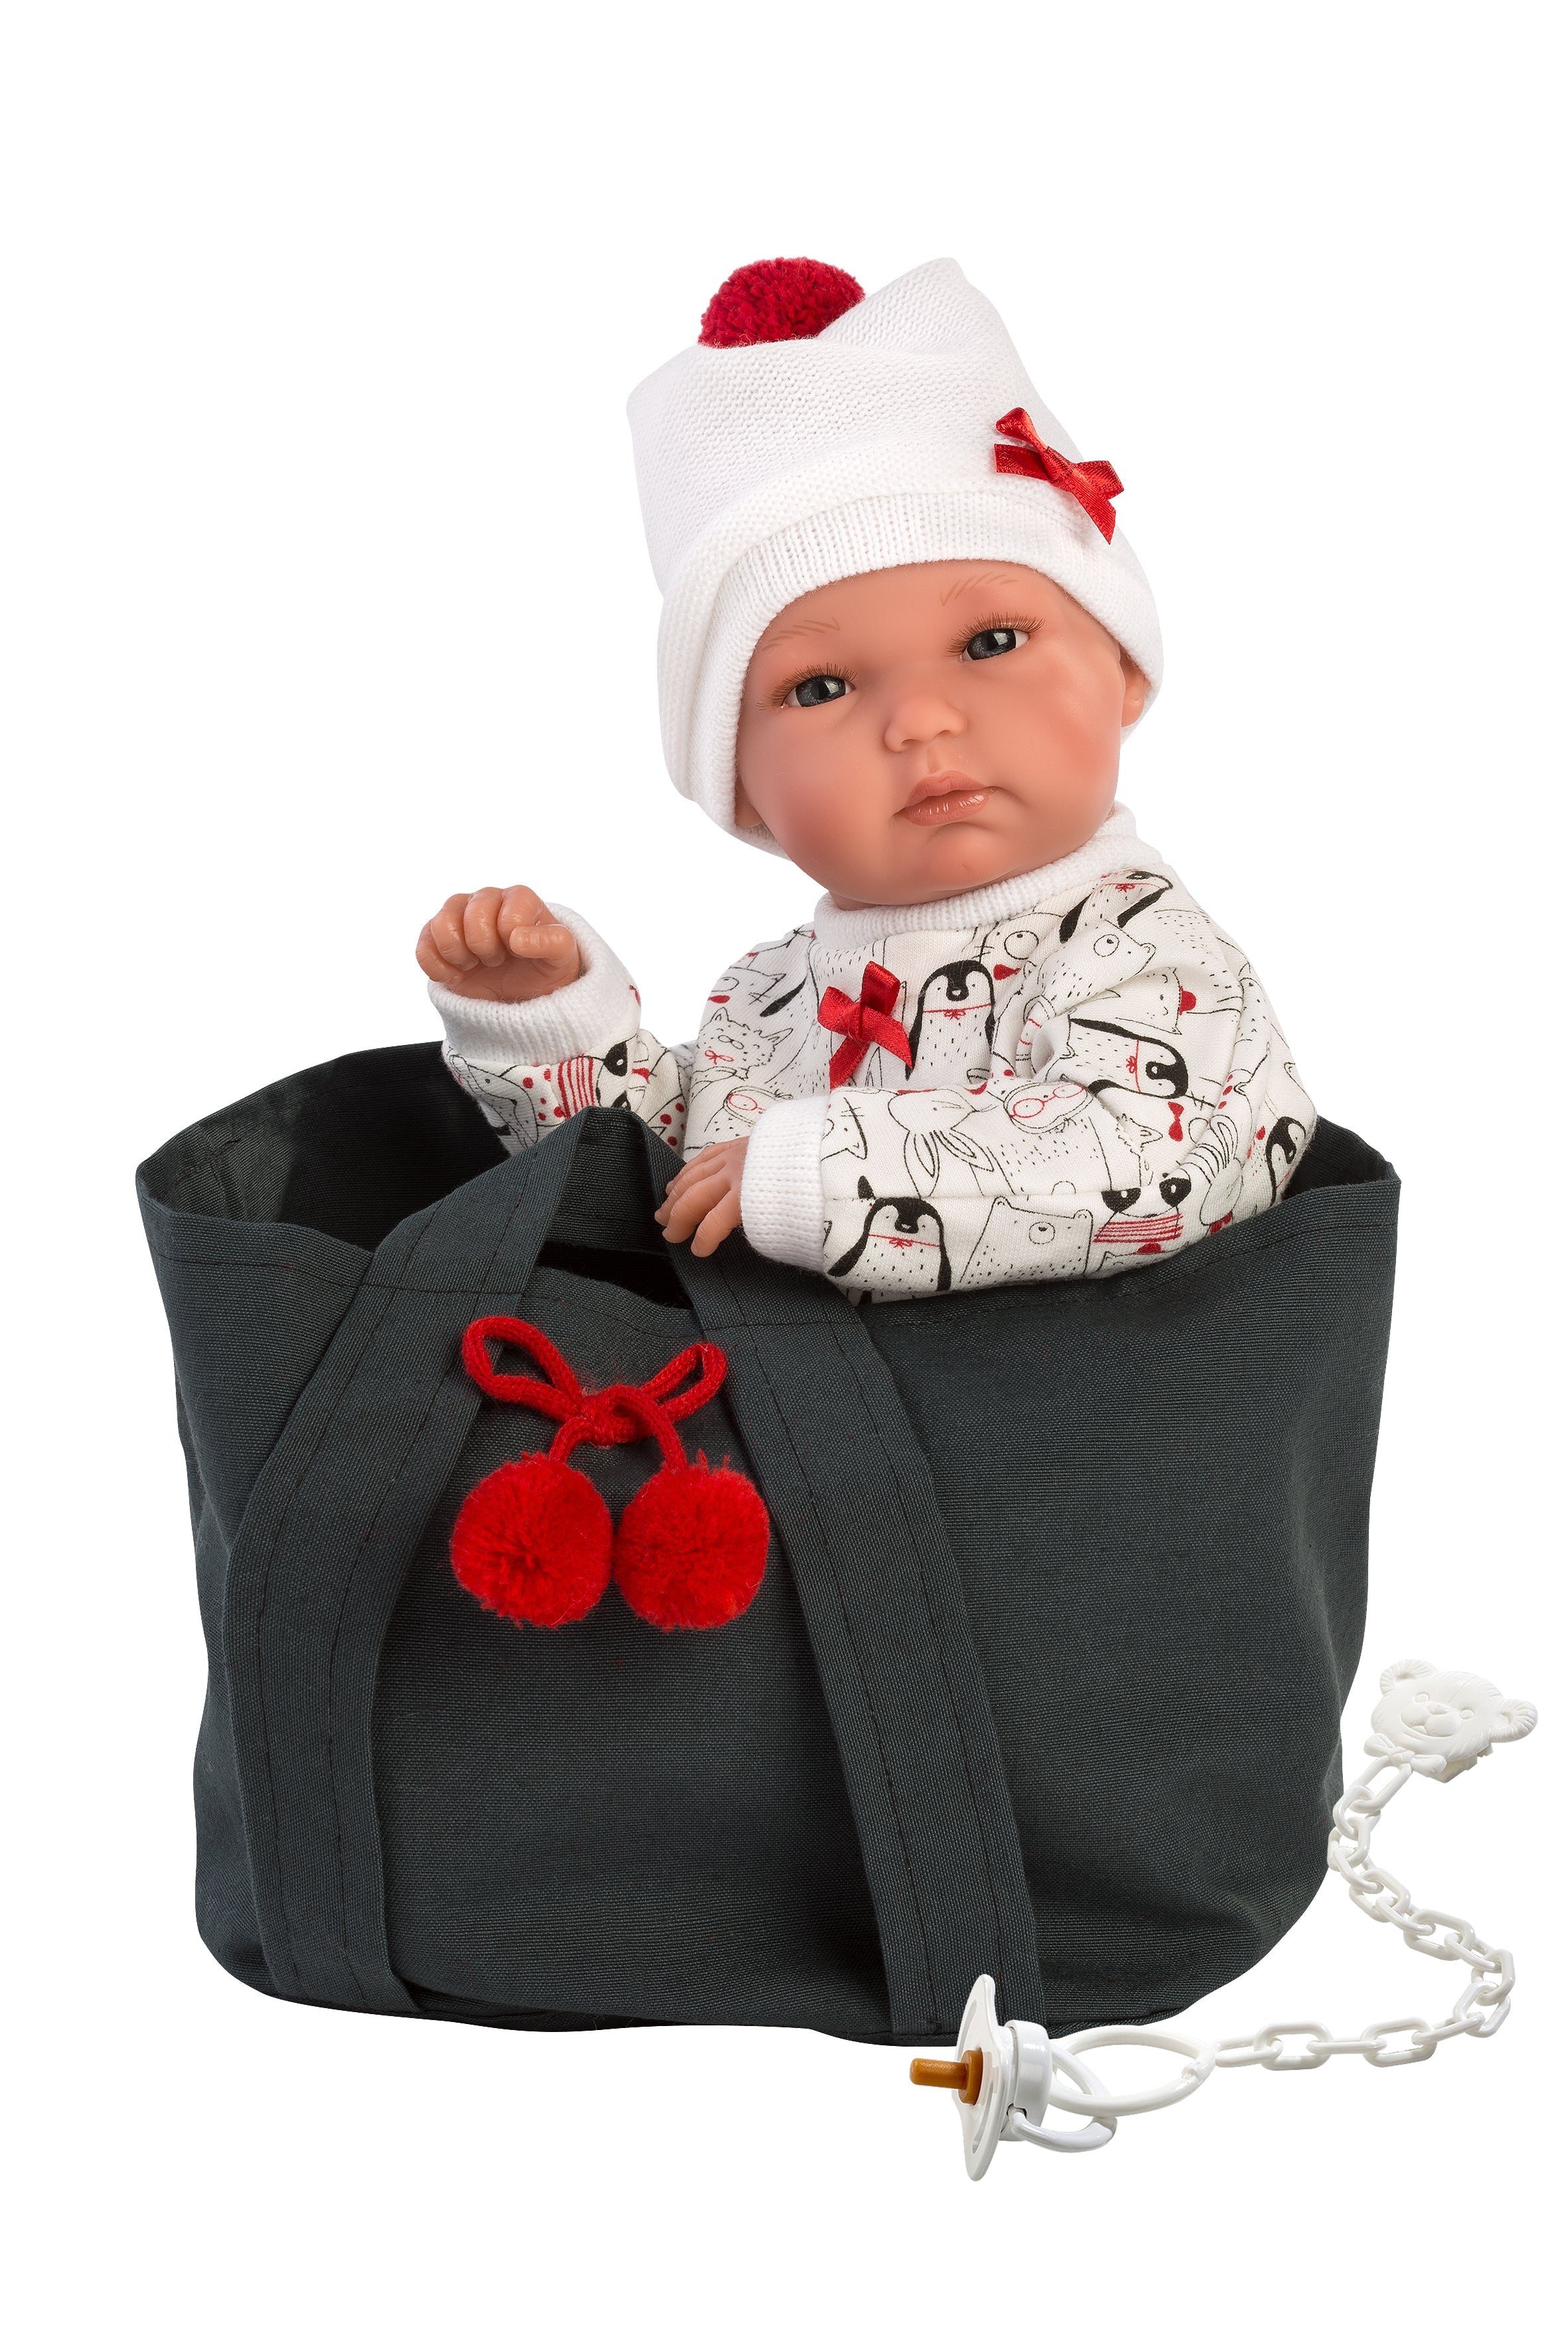 Llorens 13.8" Anatomically-correct Baby Doll Lucy With Cherry Carrycot Dolls